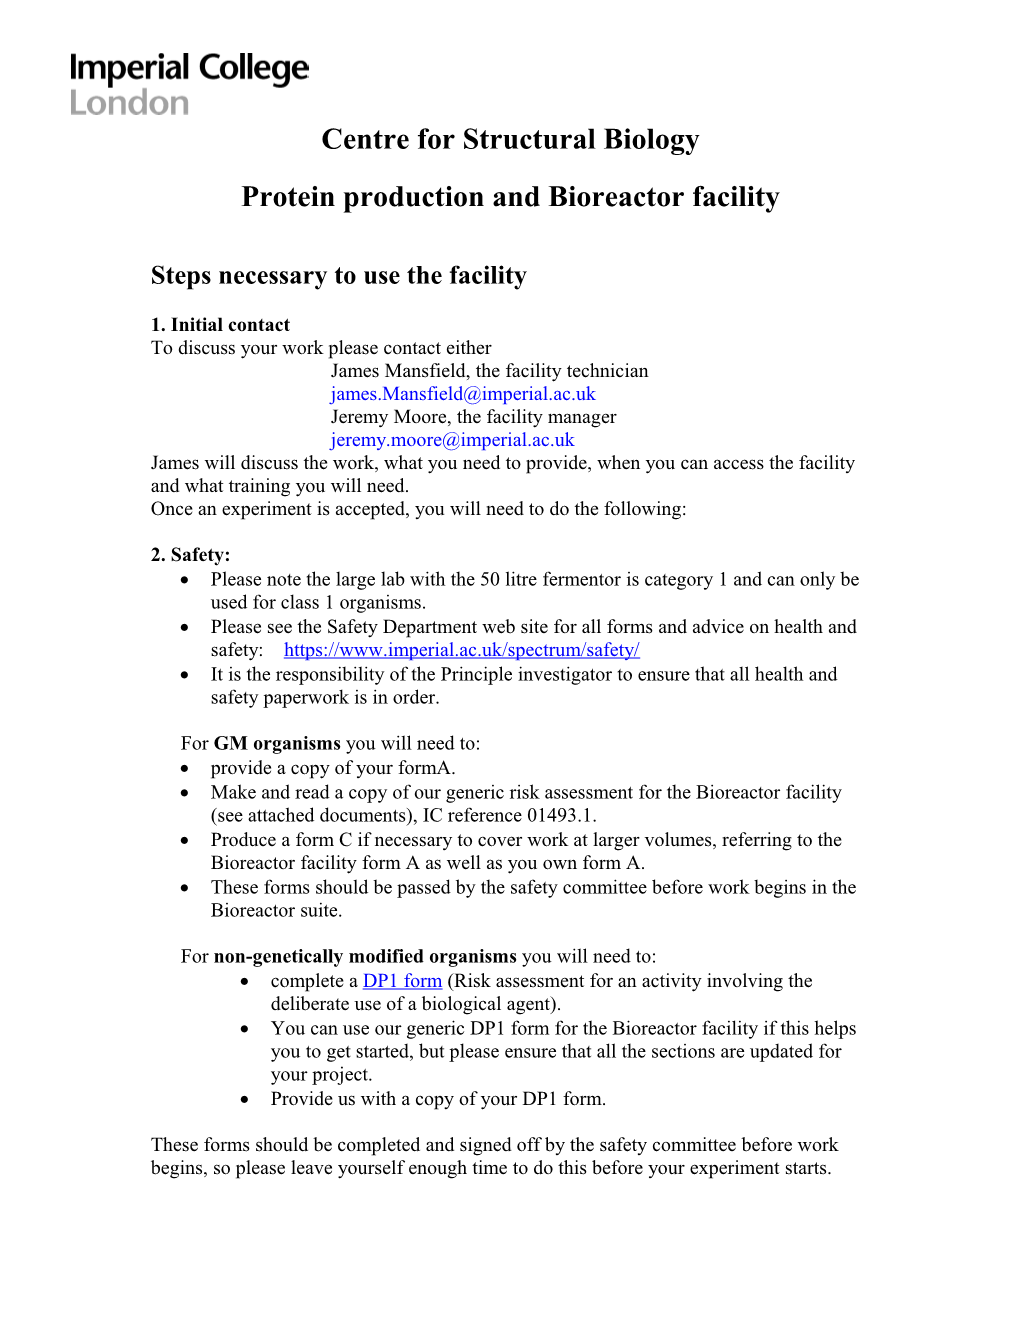 Protein Production and Bioreactor Facility